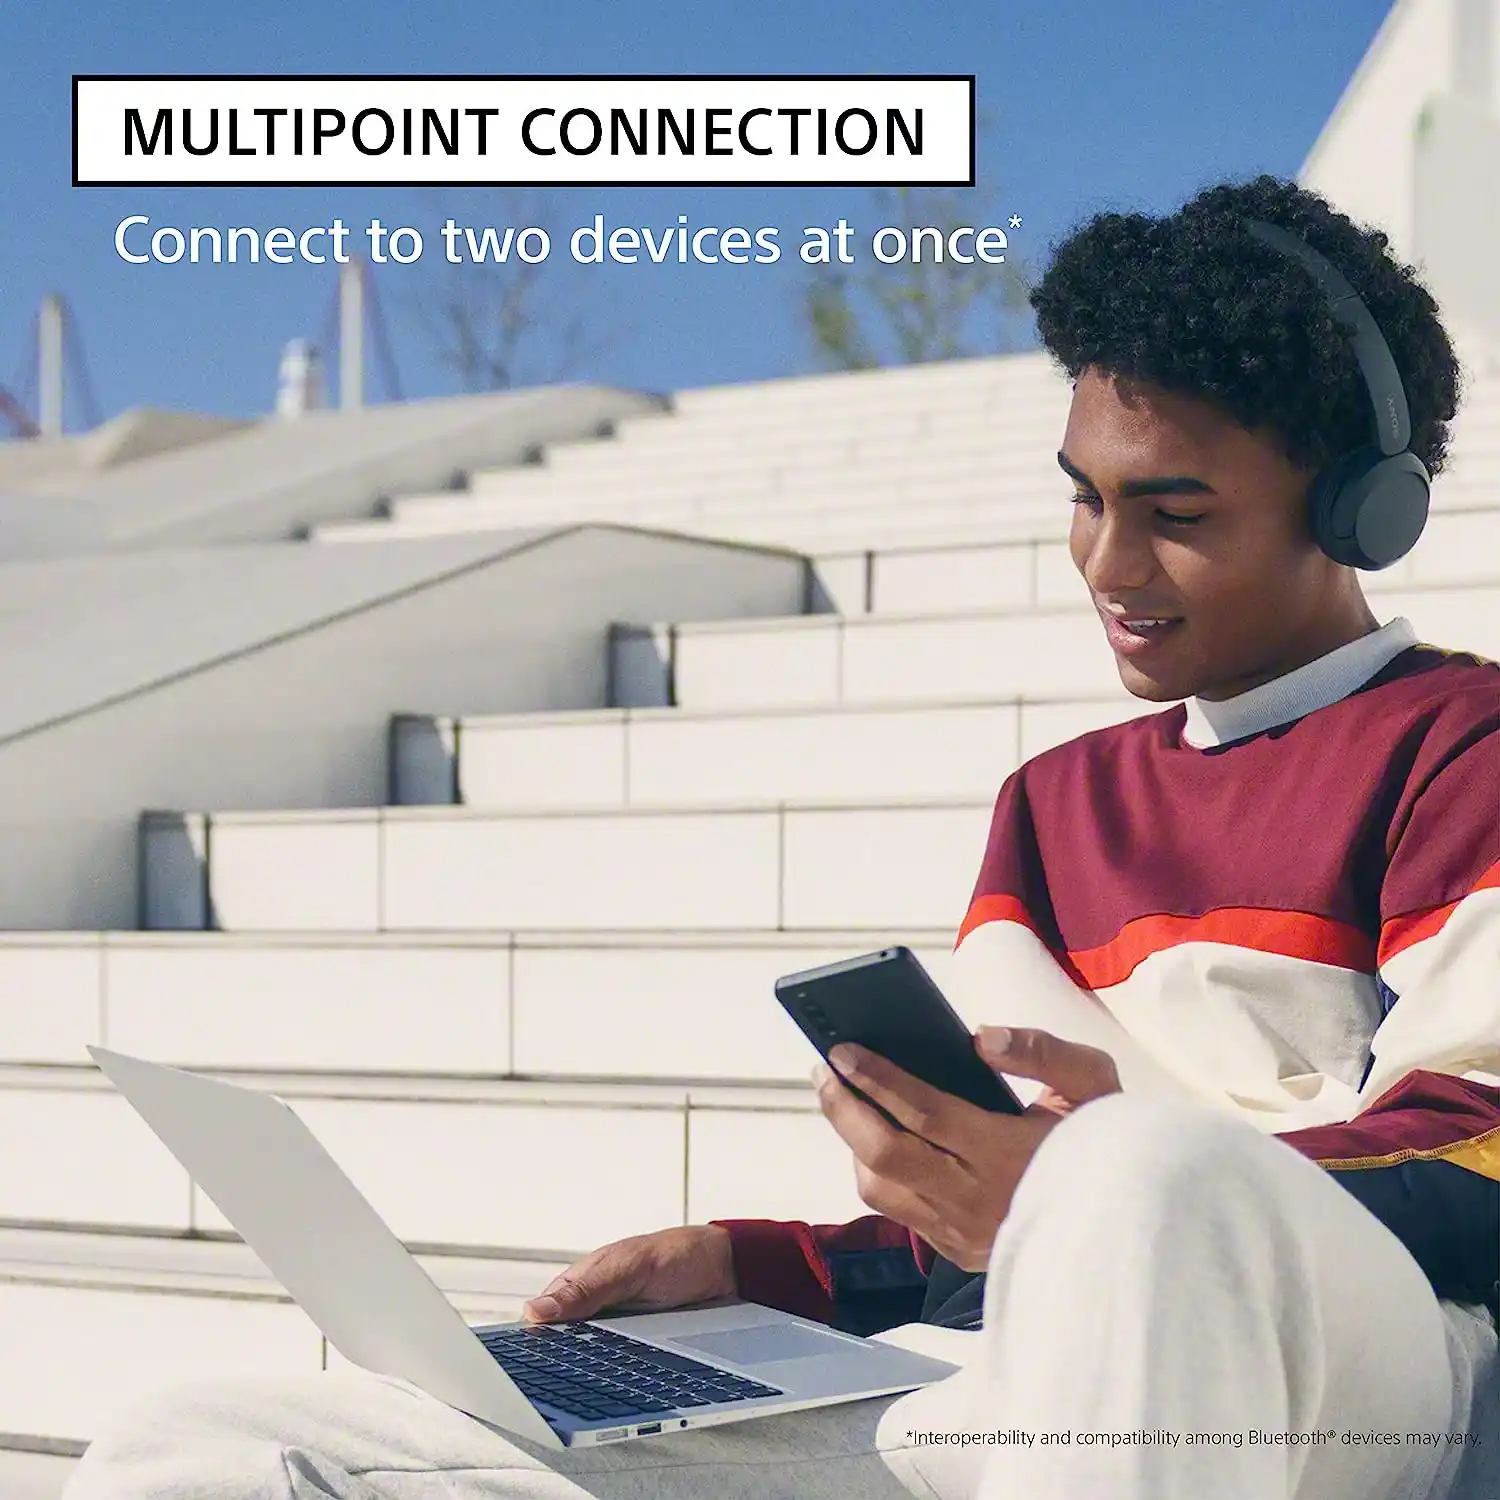 Sony WH-CH520 multipoint connection connect to two devices at onece